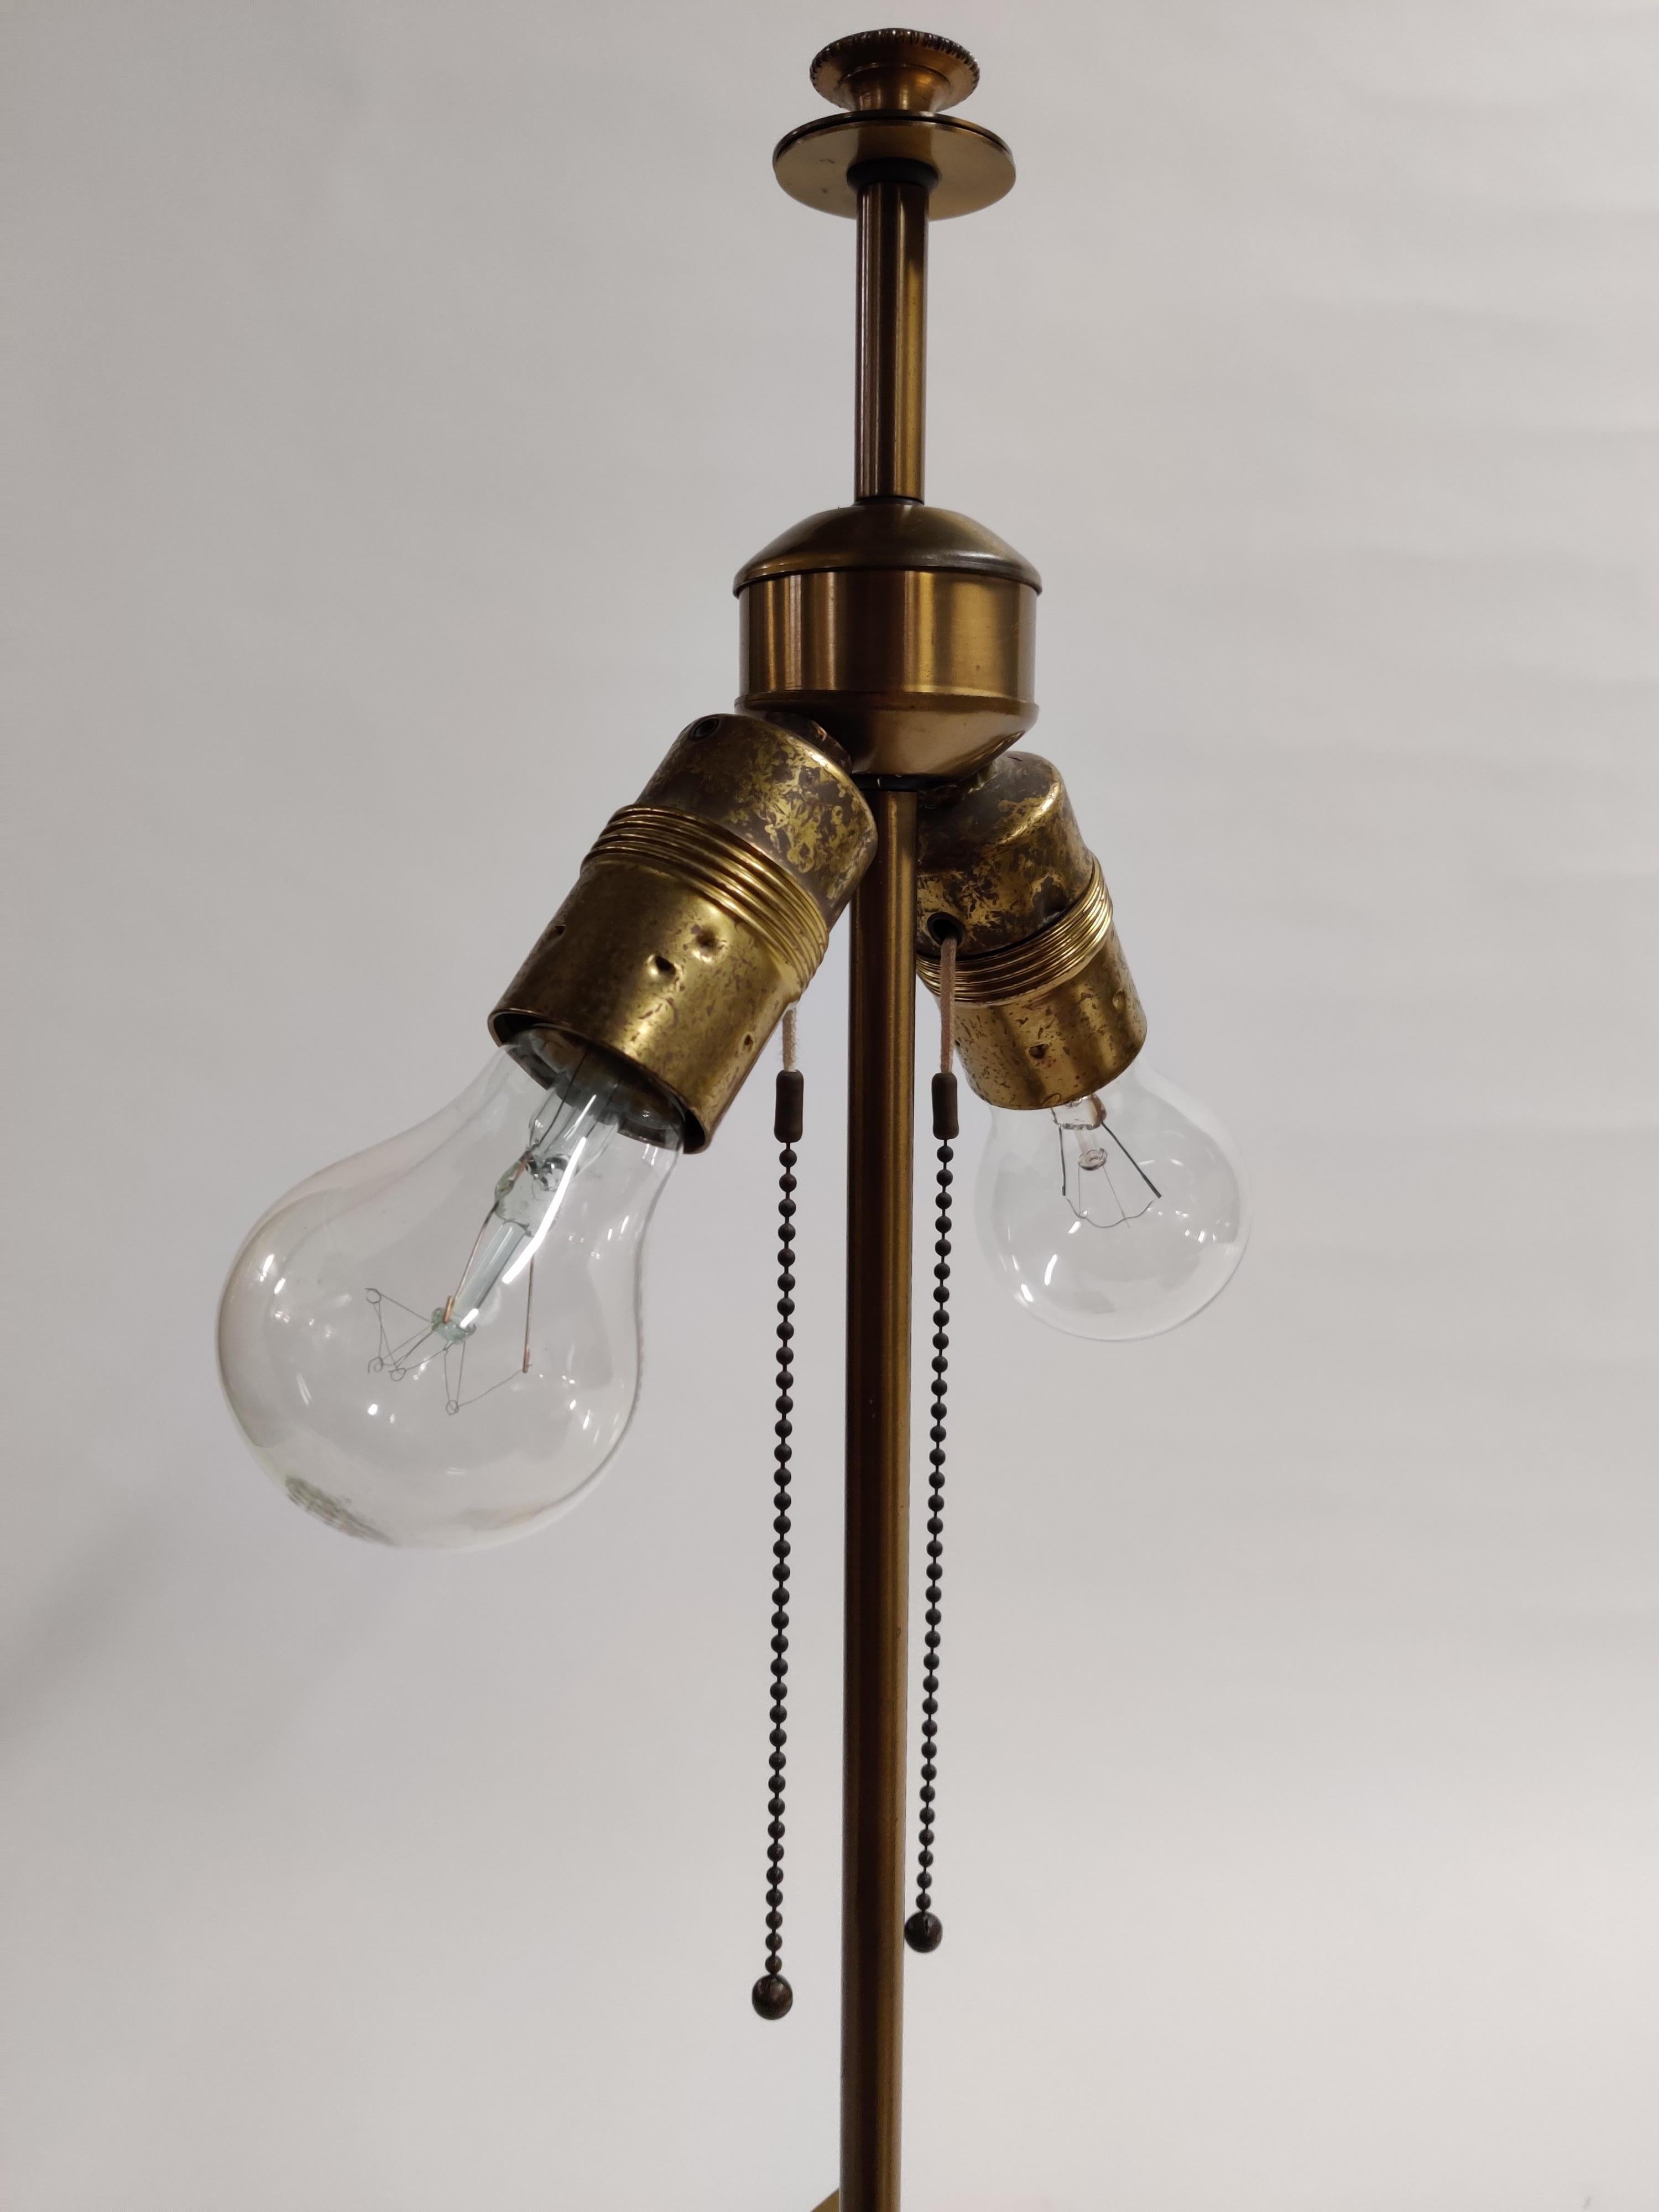 Huge brass and chrome table lamp by Gaetano Sciolari.

This lamp has been left as it is with a beautiful patina.

The lamp emits a beautiful warm light.

It consists of two E26/E27 light bulb holders with individual pulling cords.

Tested